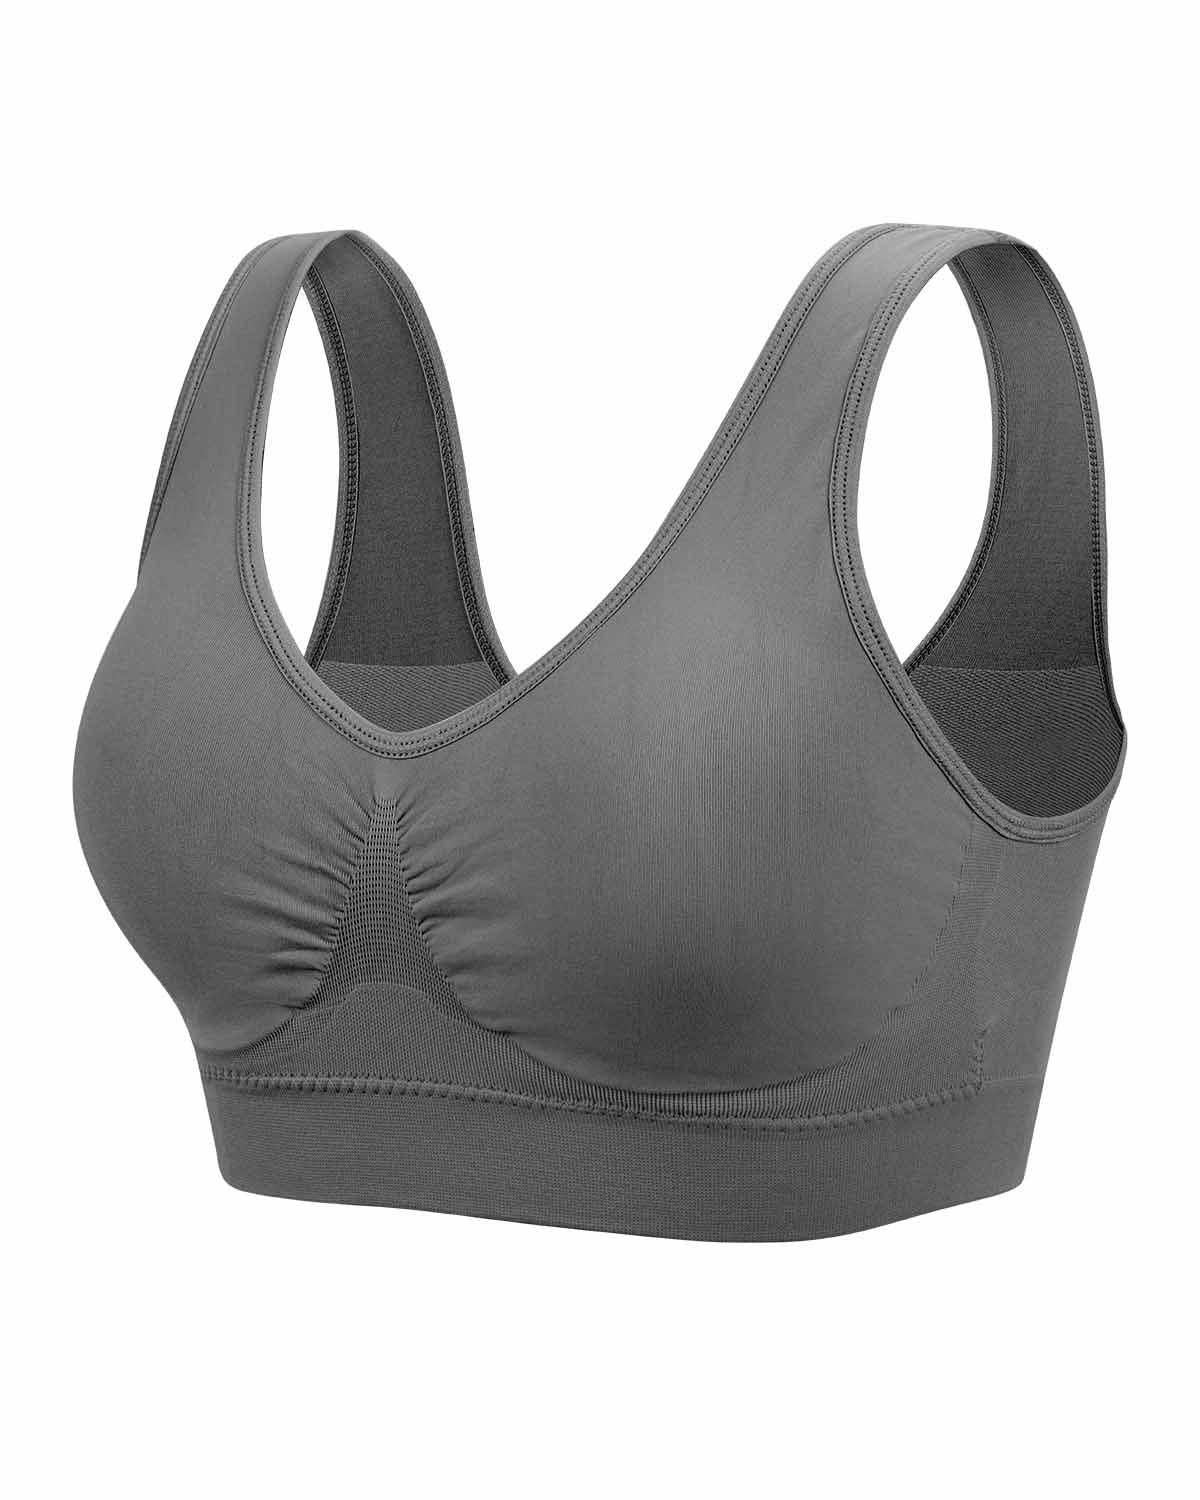 Comfort Bra Sport - Forests, Tides, and Treasures